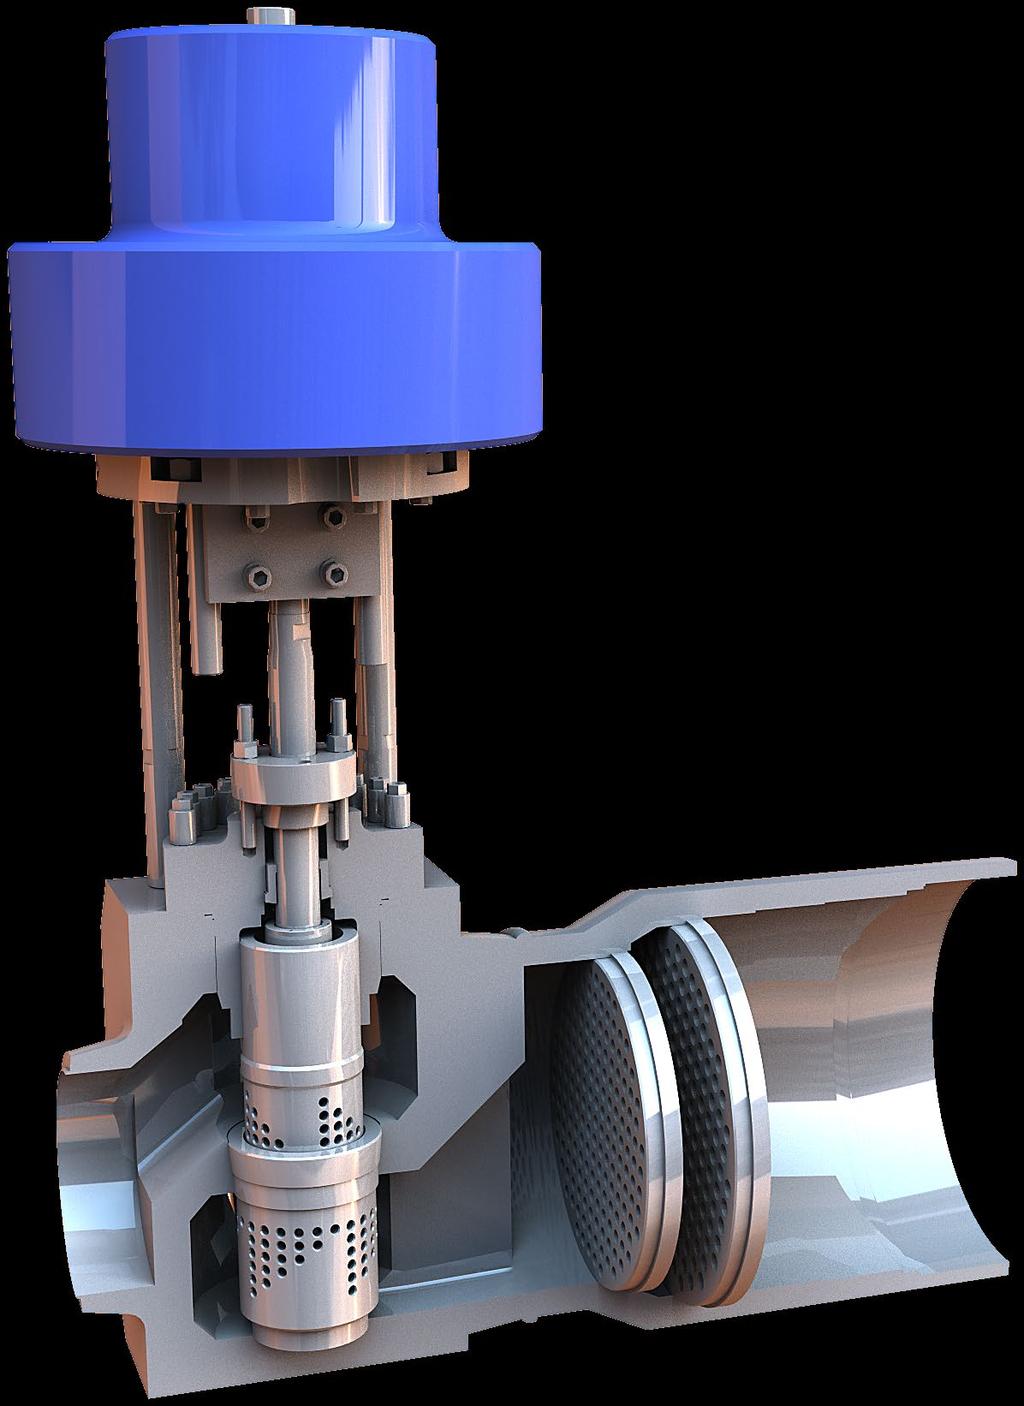 State-of-the-art steam pressure reduction SCHROEDAHL develops, manufactures and supplies high quality and individually configurated steam pressure reduction valves.